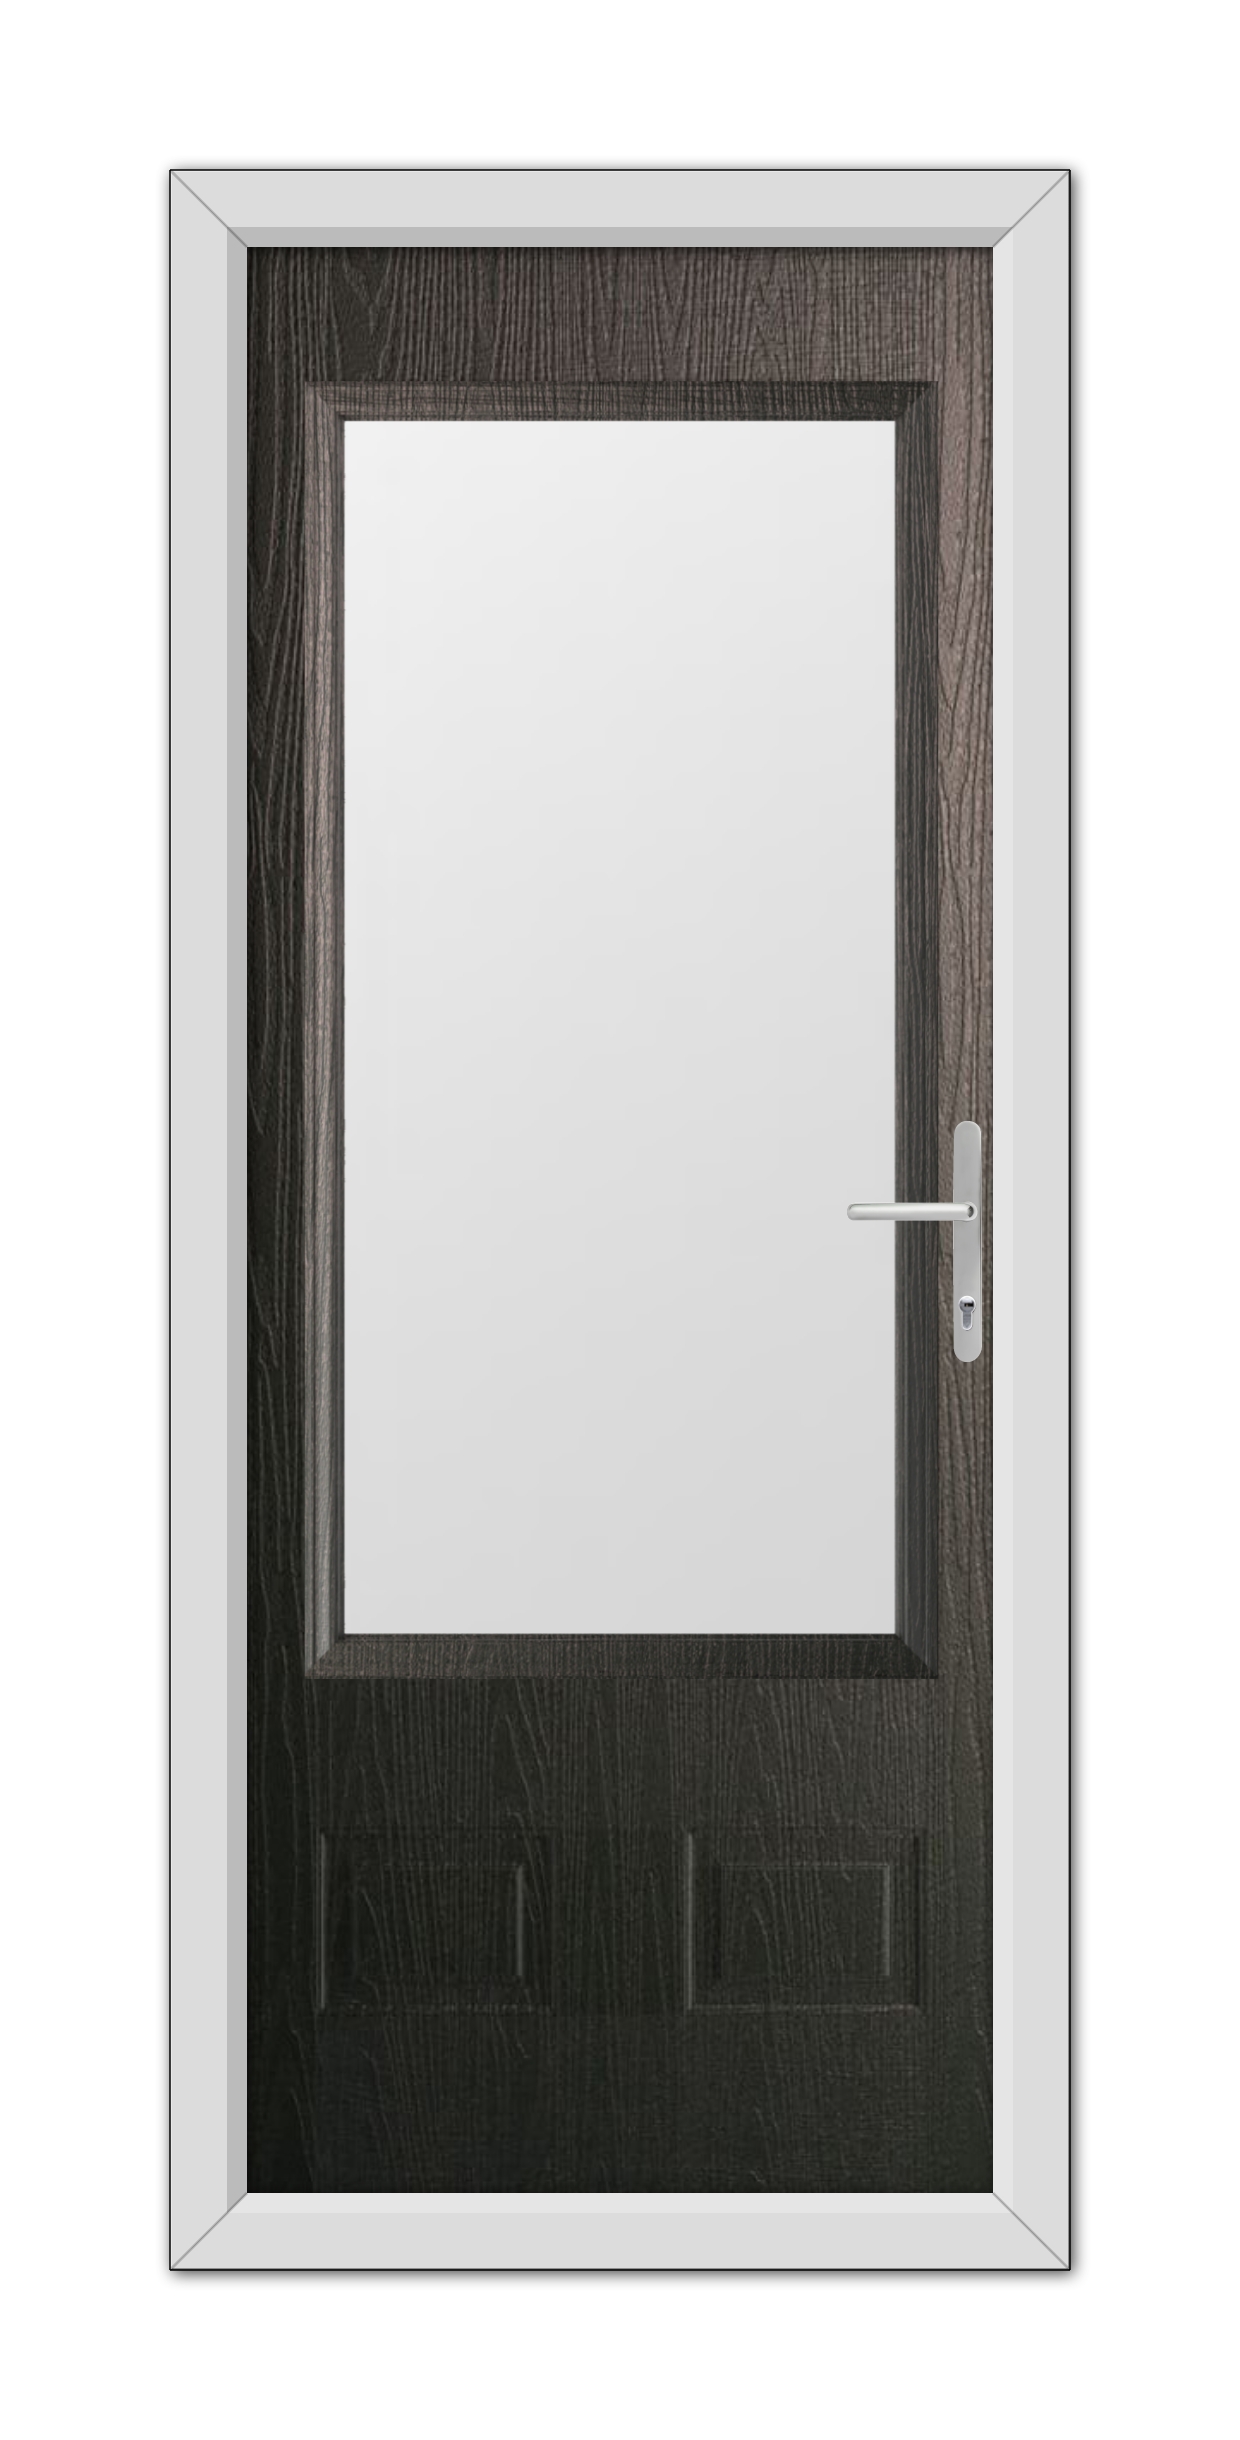 A modern Schwarzbraun Walcot Composite Door 48mm Timber Core with a white frame, dark wood panels, and a metallic handle, isolated on a white background.